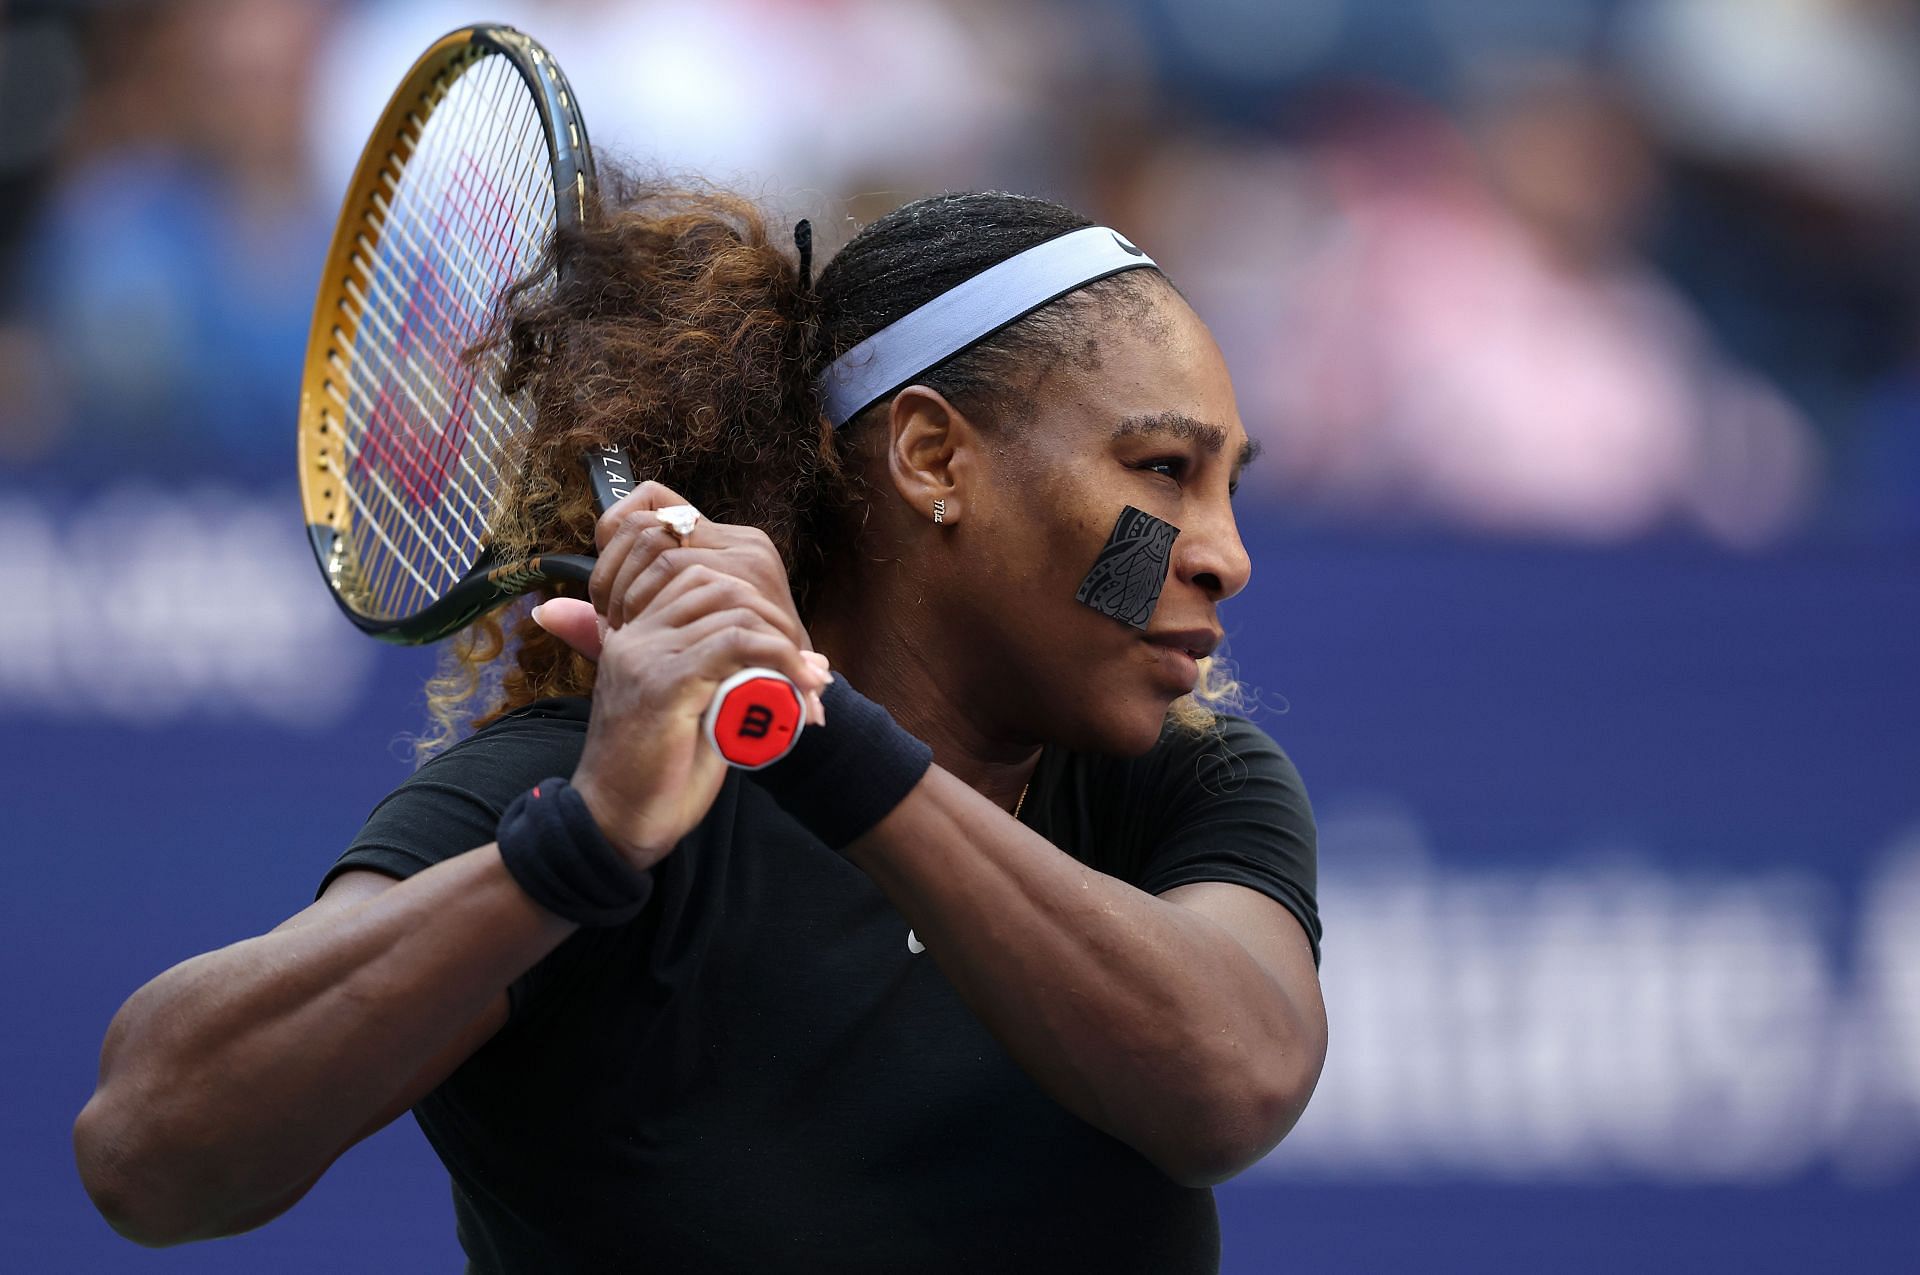 Serena Williams is expected to bid goodbye to her storied career in the US Open.